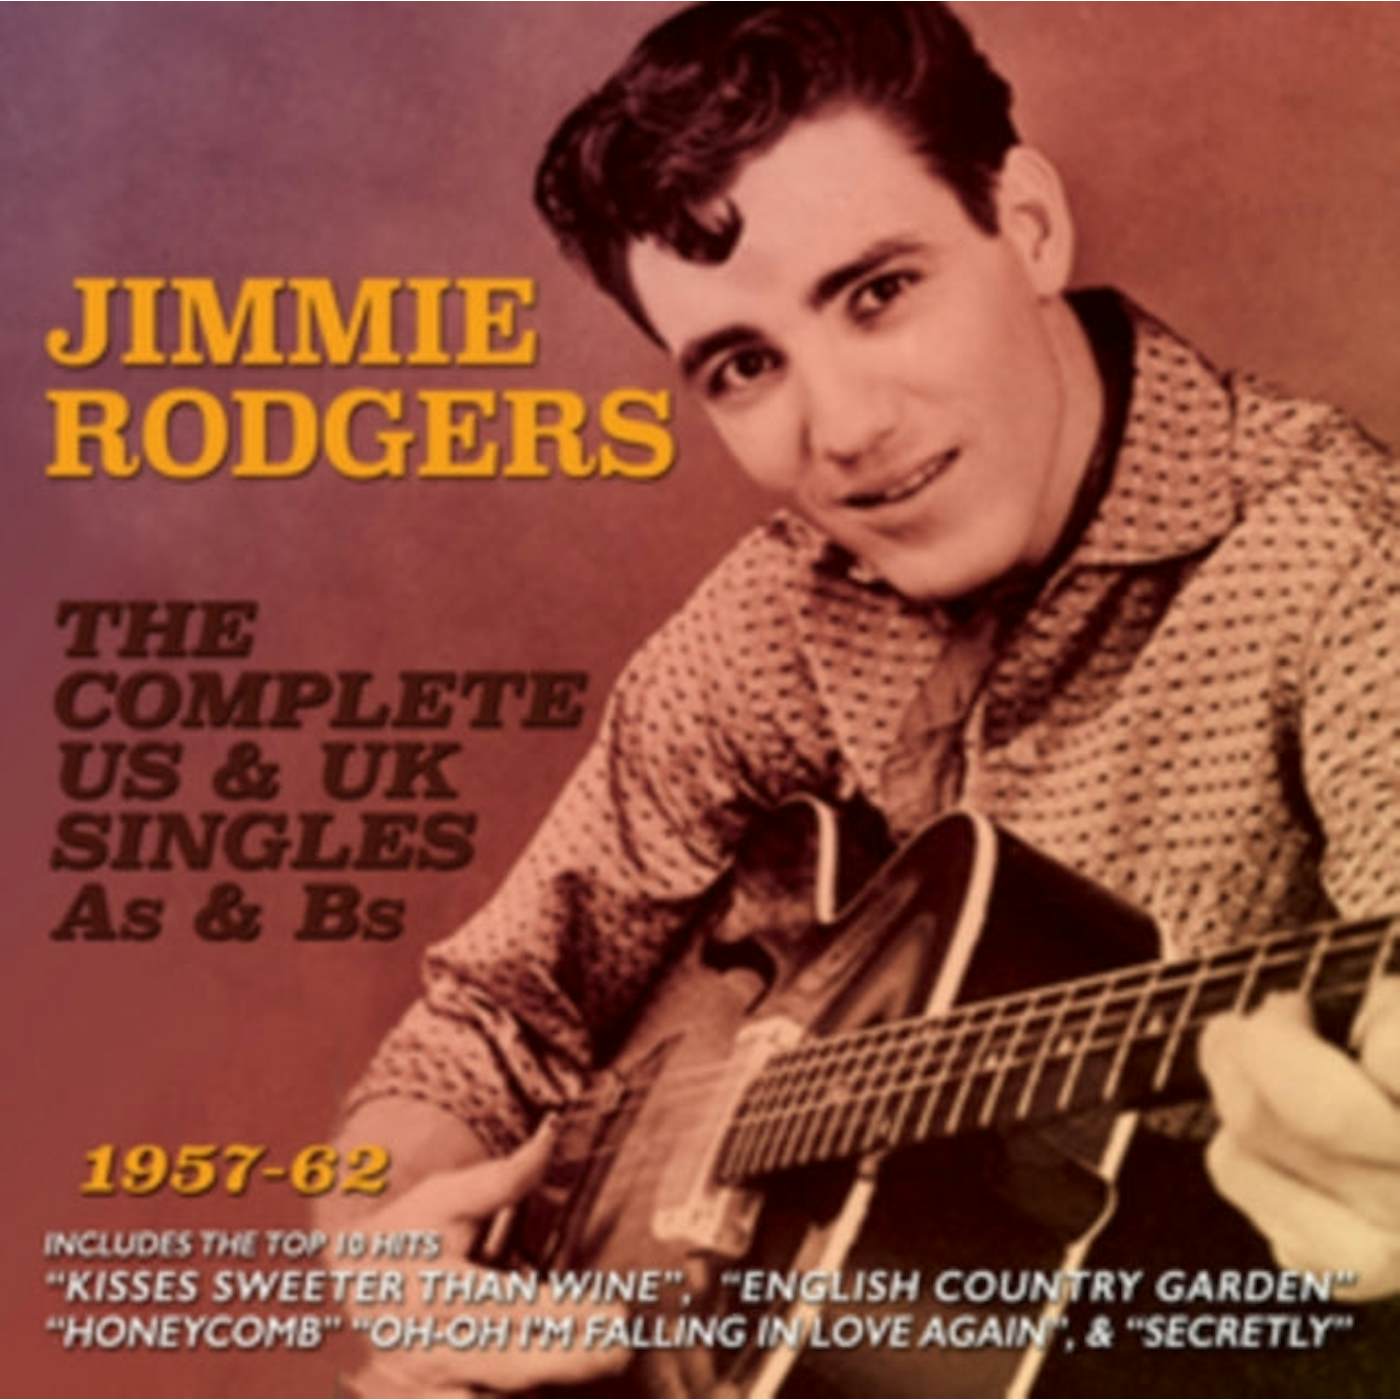 Jimmie Rodgers CD - The Complete Us & Uk Singles As & Bs 1957-62